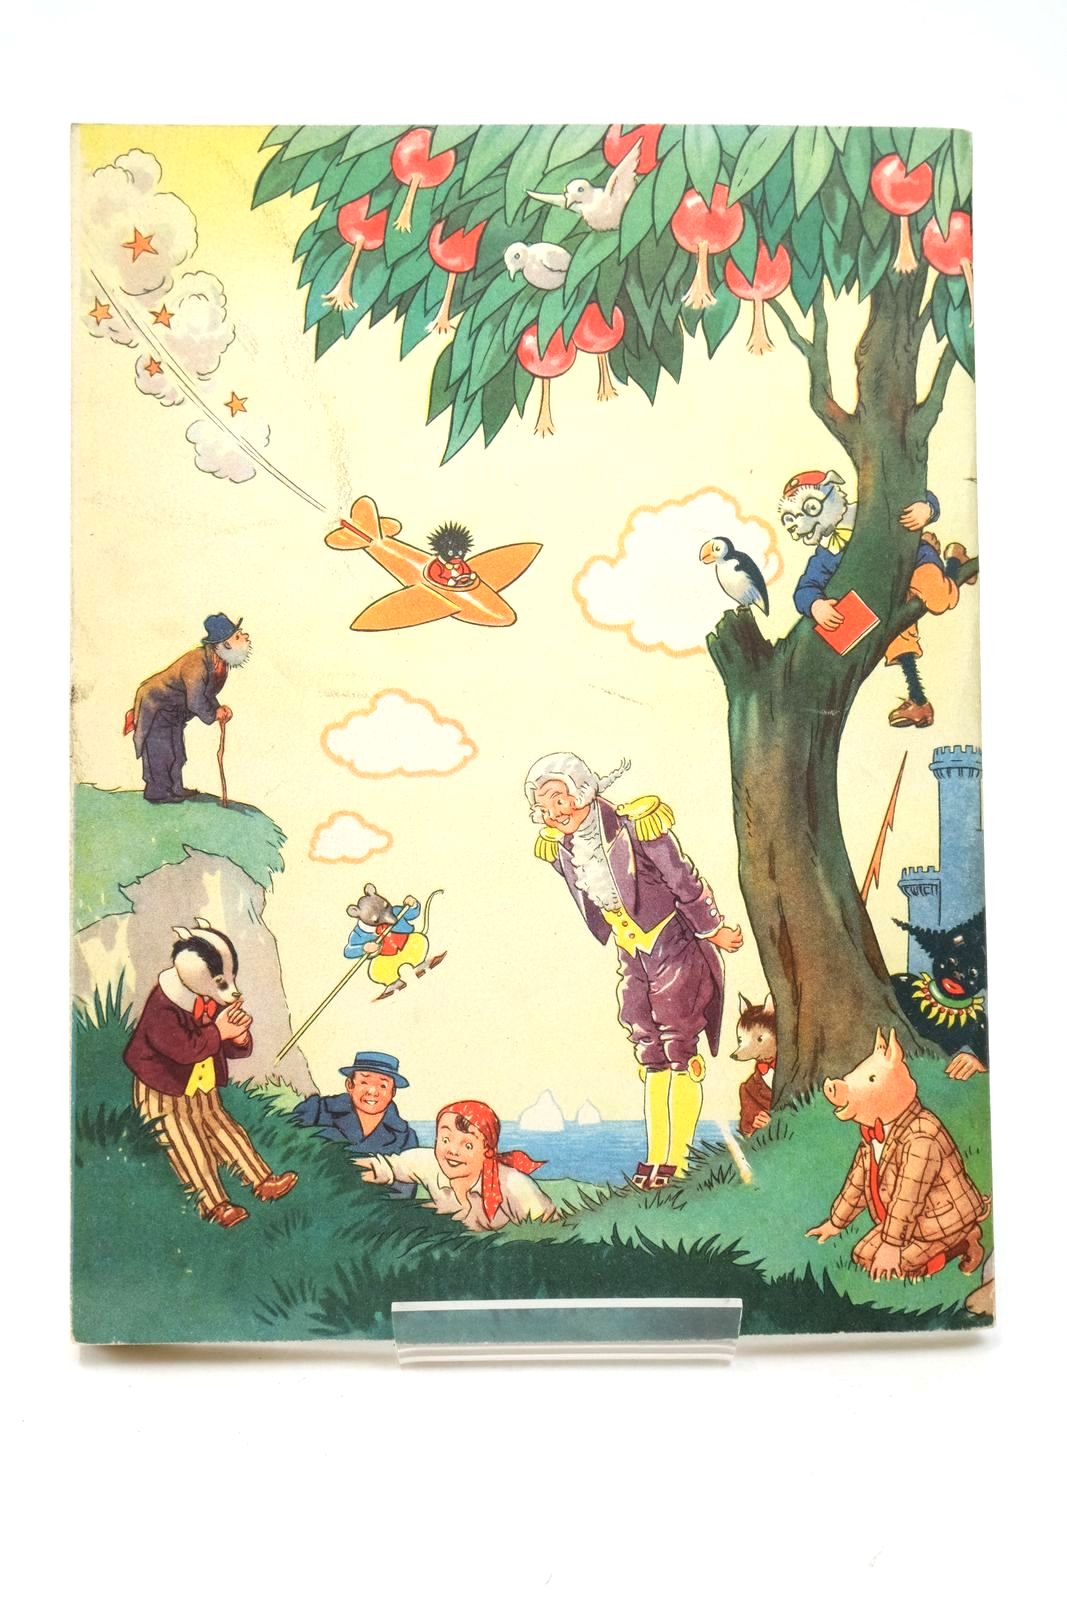 Photo of RUPERT ANNUAL 1945 - A NEW RUPERT BOOK written by Bestall, Alfred illustrated by Bestall, Alfred published by Daily Express (STOCK CODE: 1322507)  for sale by Stella & Rose's Books